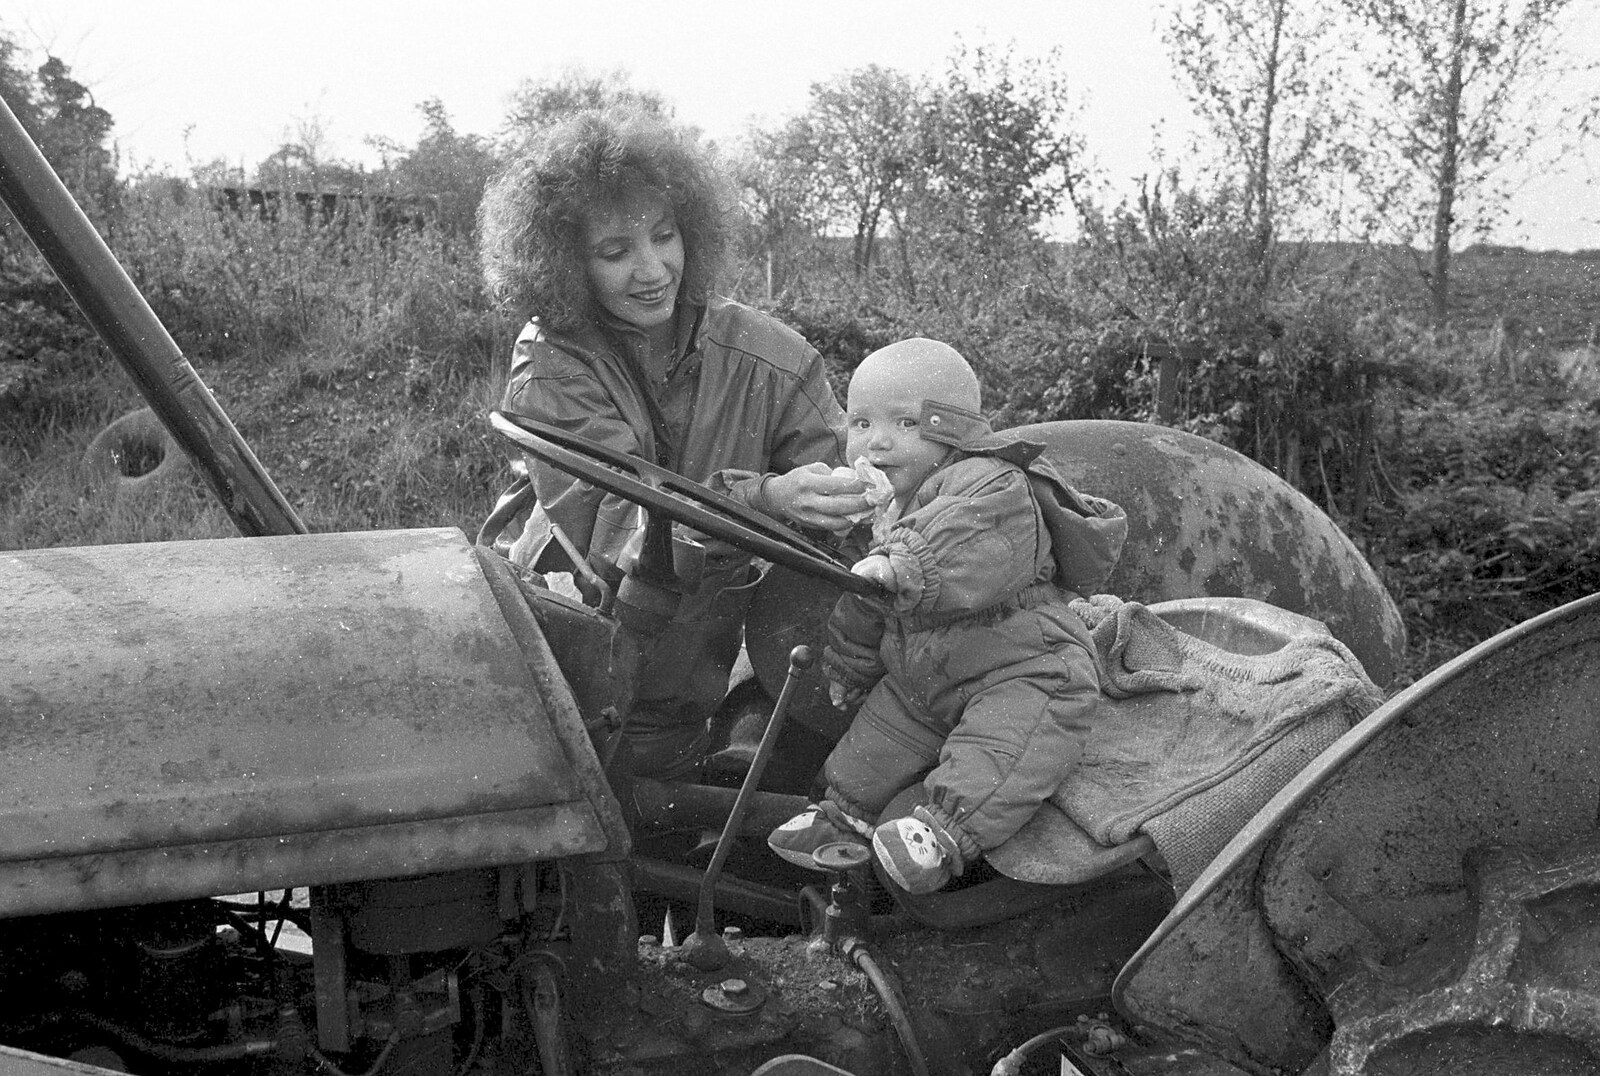 Monique wipes something off the baby's face from Cider Making in Black and White, Stuston, Suffolk - 11th October 1992